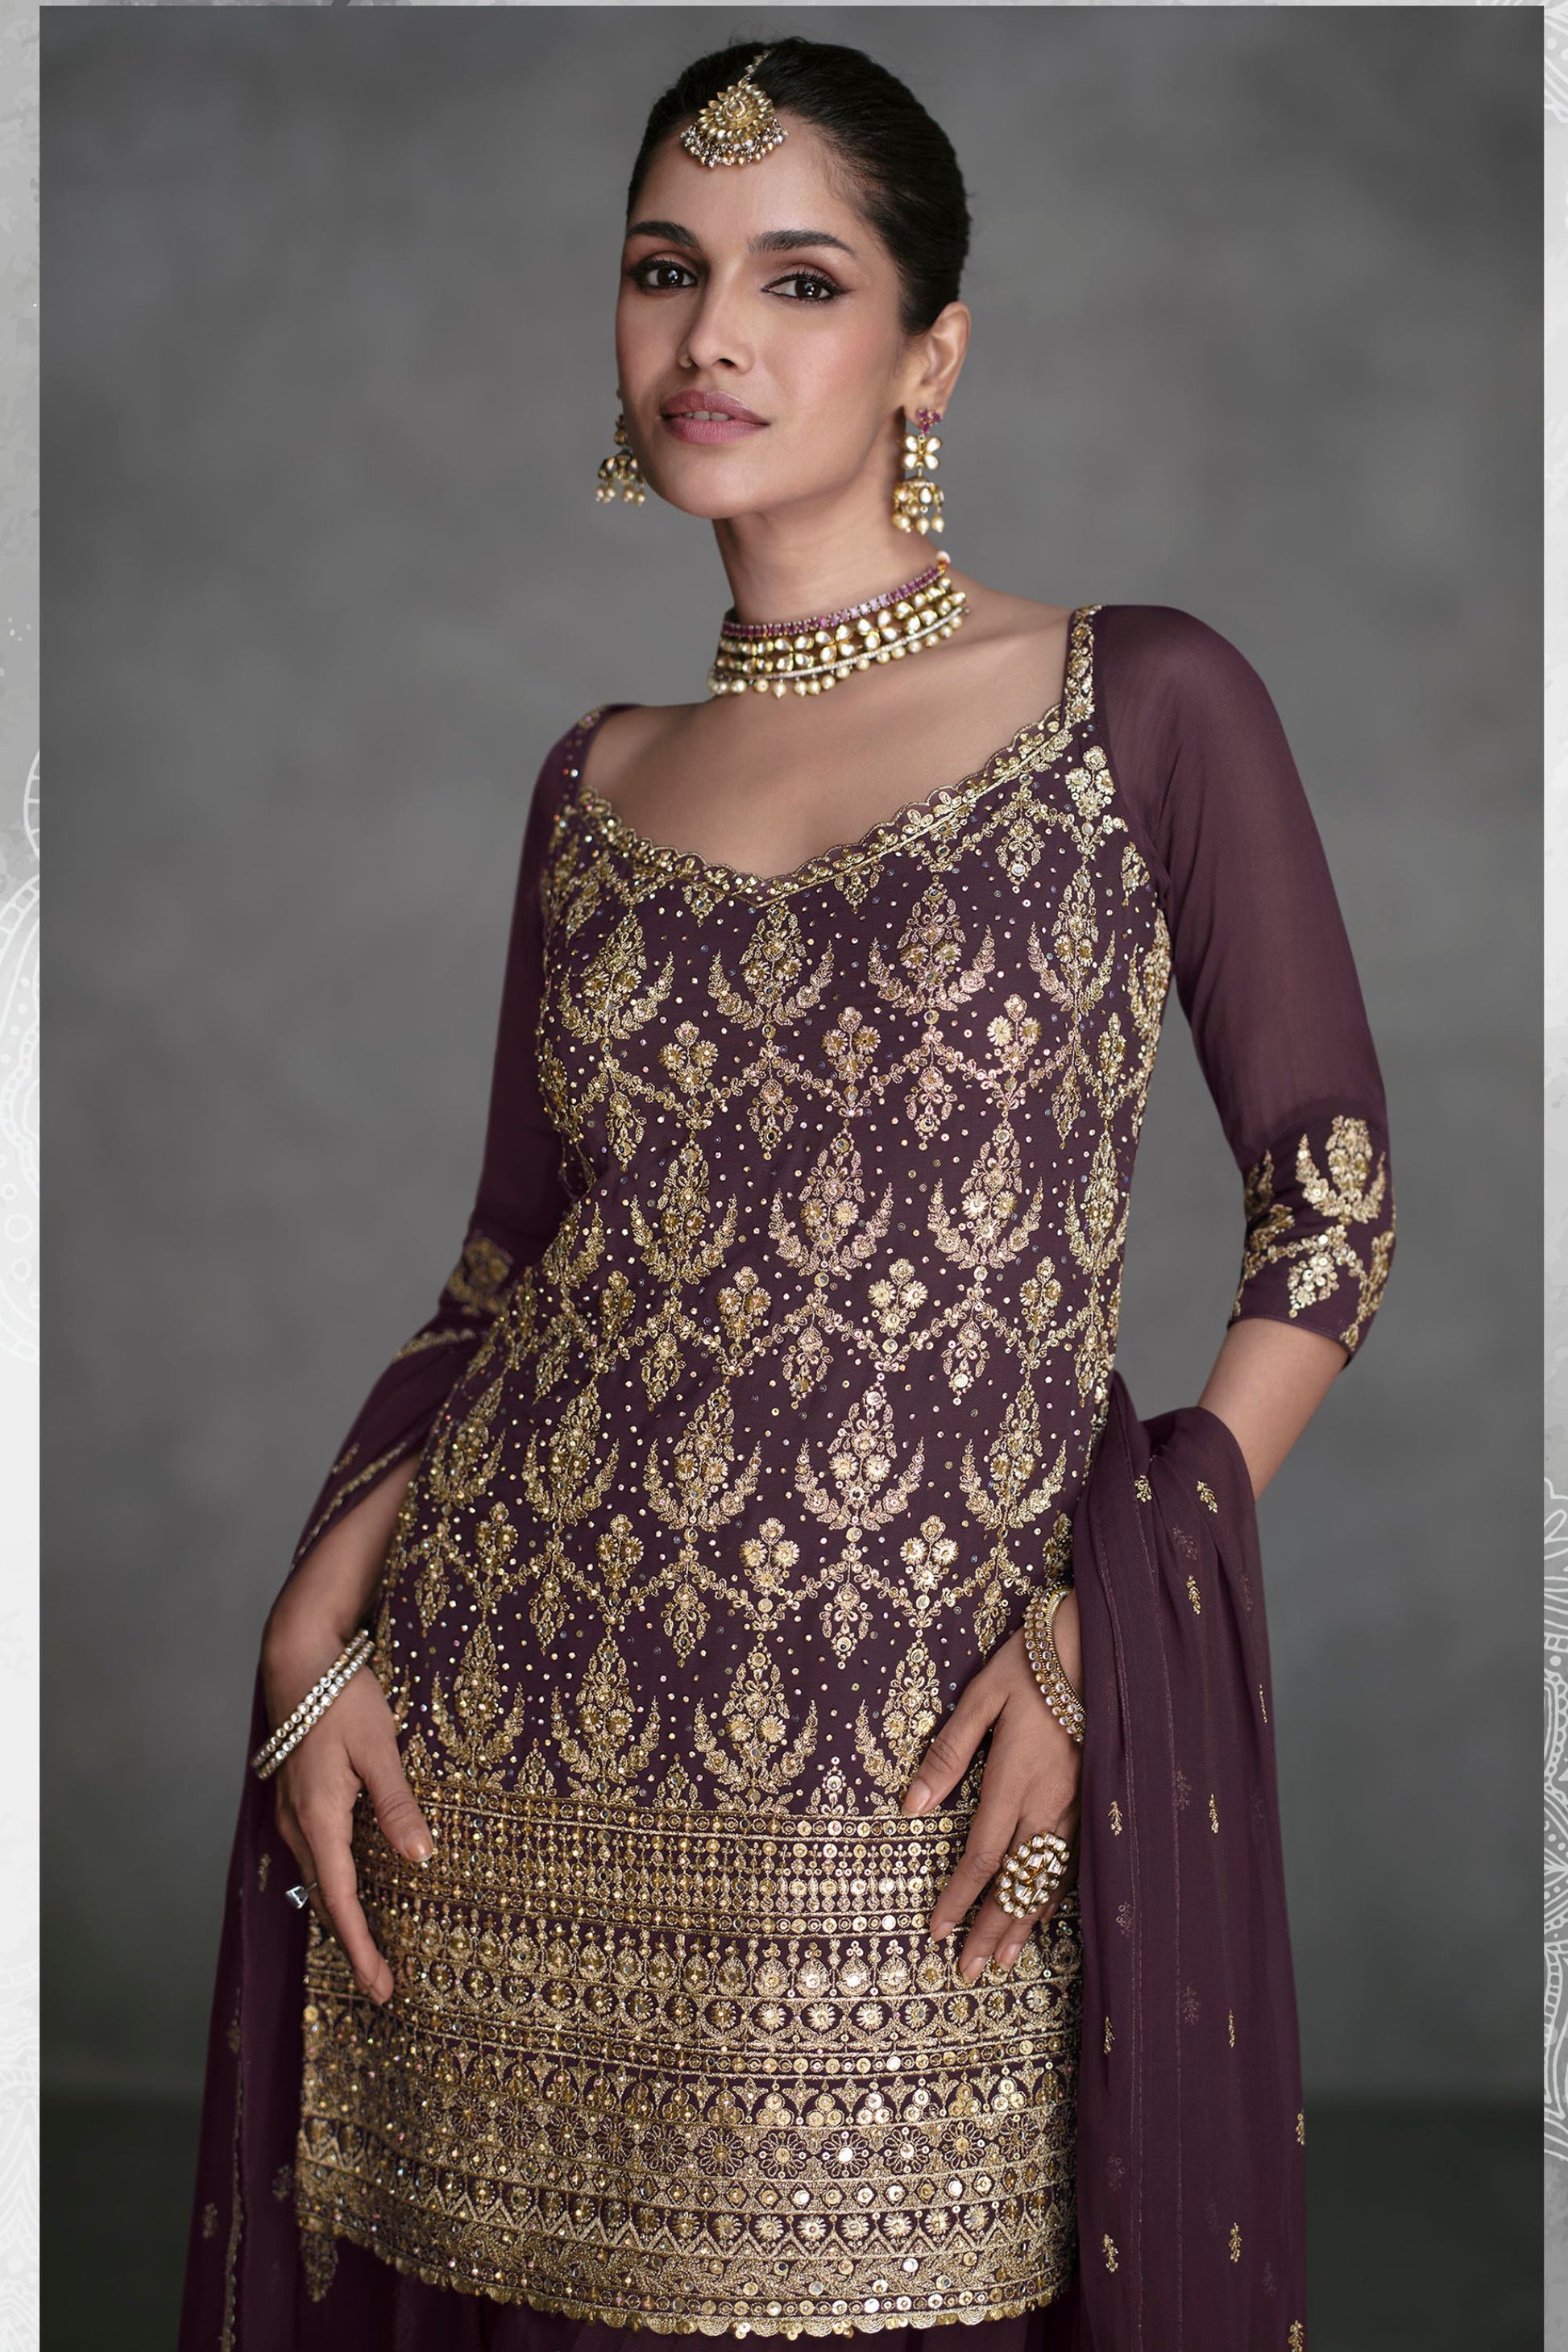 Brown Georgette Plazo Suit For Indian Festivals & Pakistani Weddings - Thread Embroidery Work